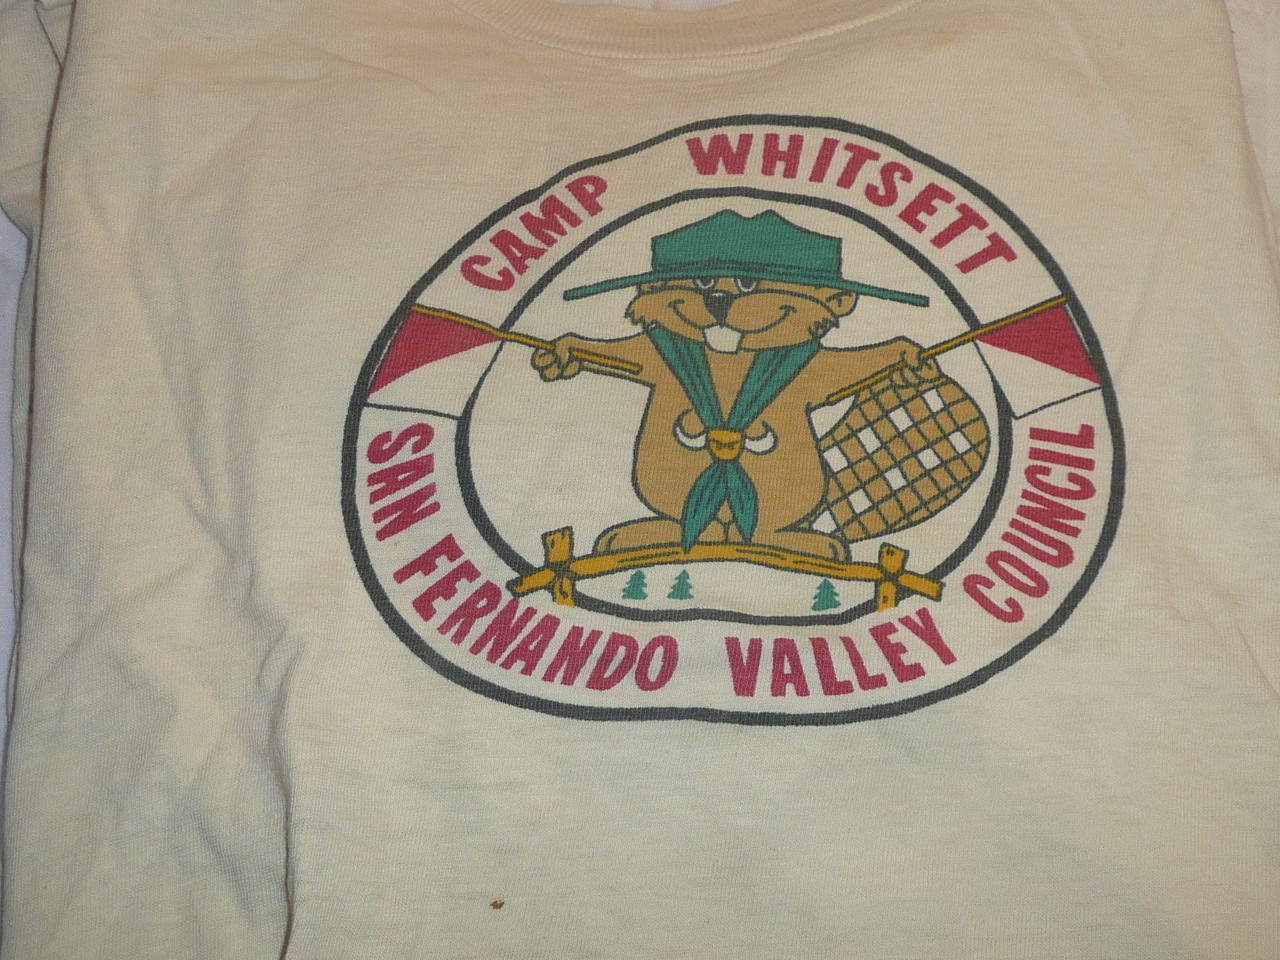 Camp Whitsett Tee Shirt, 1970, Men's X-Large, Used with stains